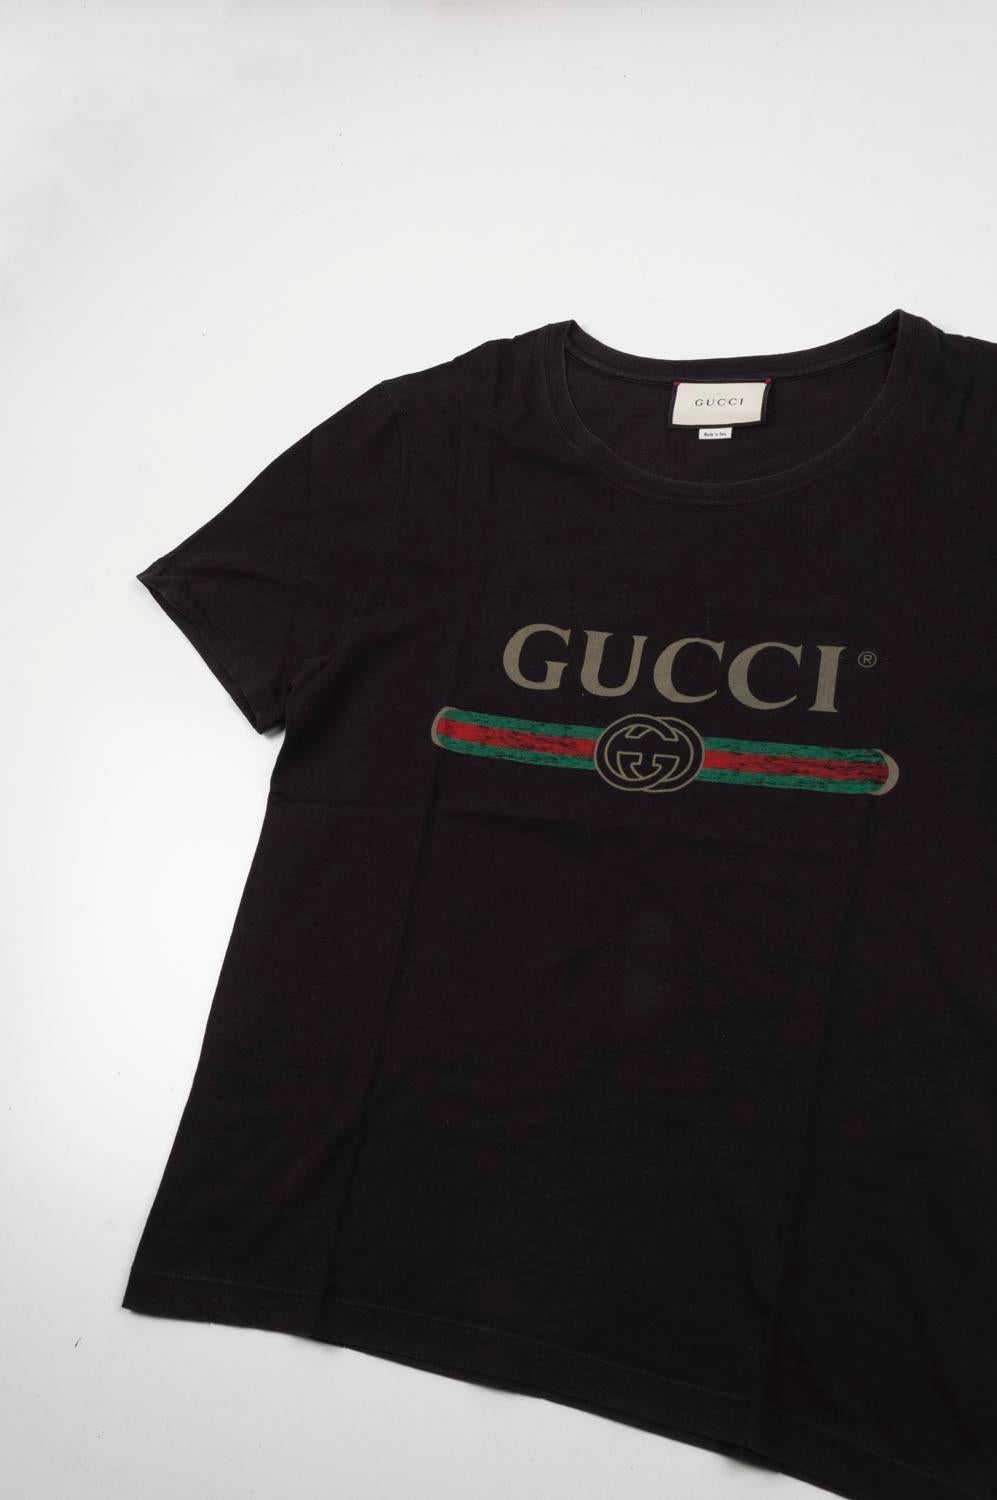 Gucci Men T-Shirt Size M, S320 In Excellent Condition For Sale In Kaunas, LT